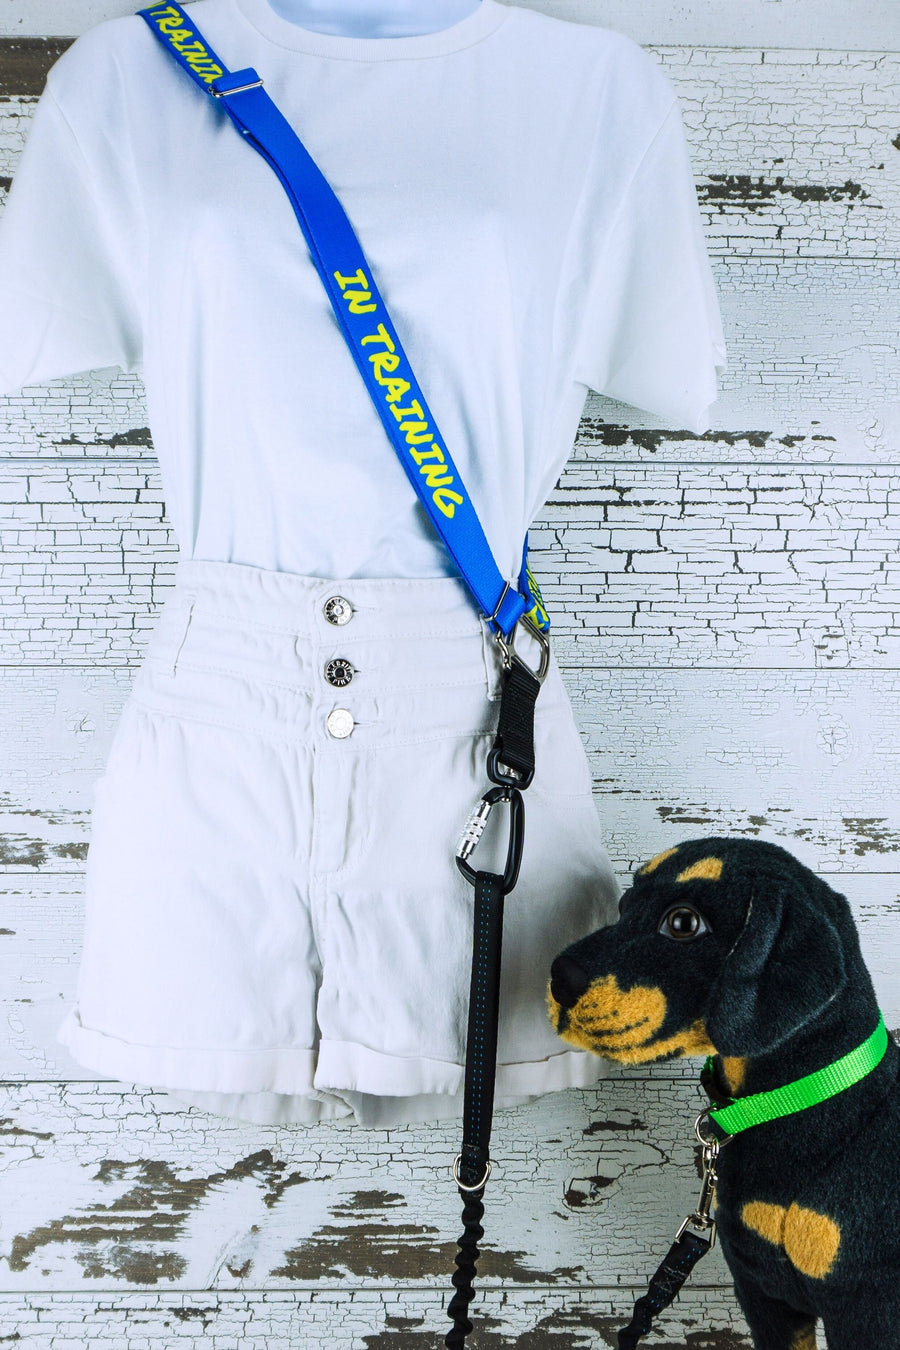 The in training message in blue is shown here in a dog on left configuration with a carabiner hardware selection, positioned on a mannequin with a dog mannequin by the side.